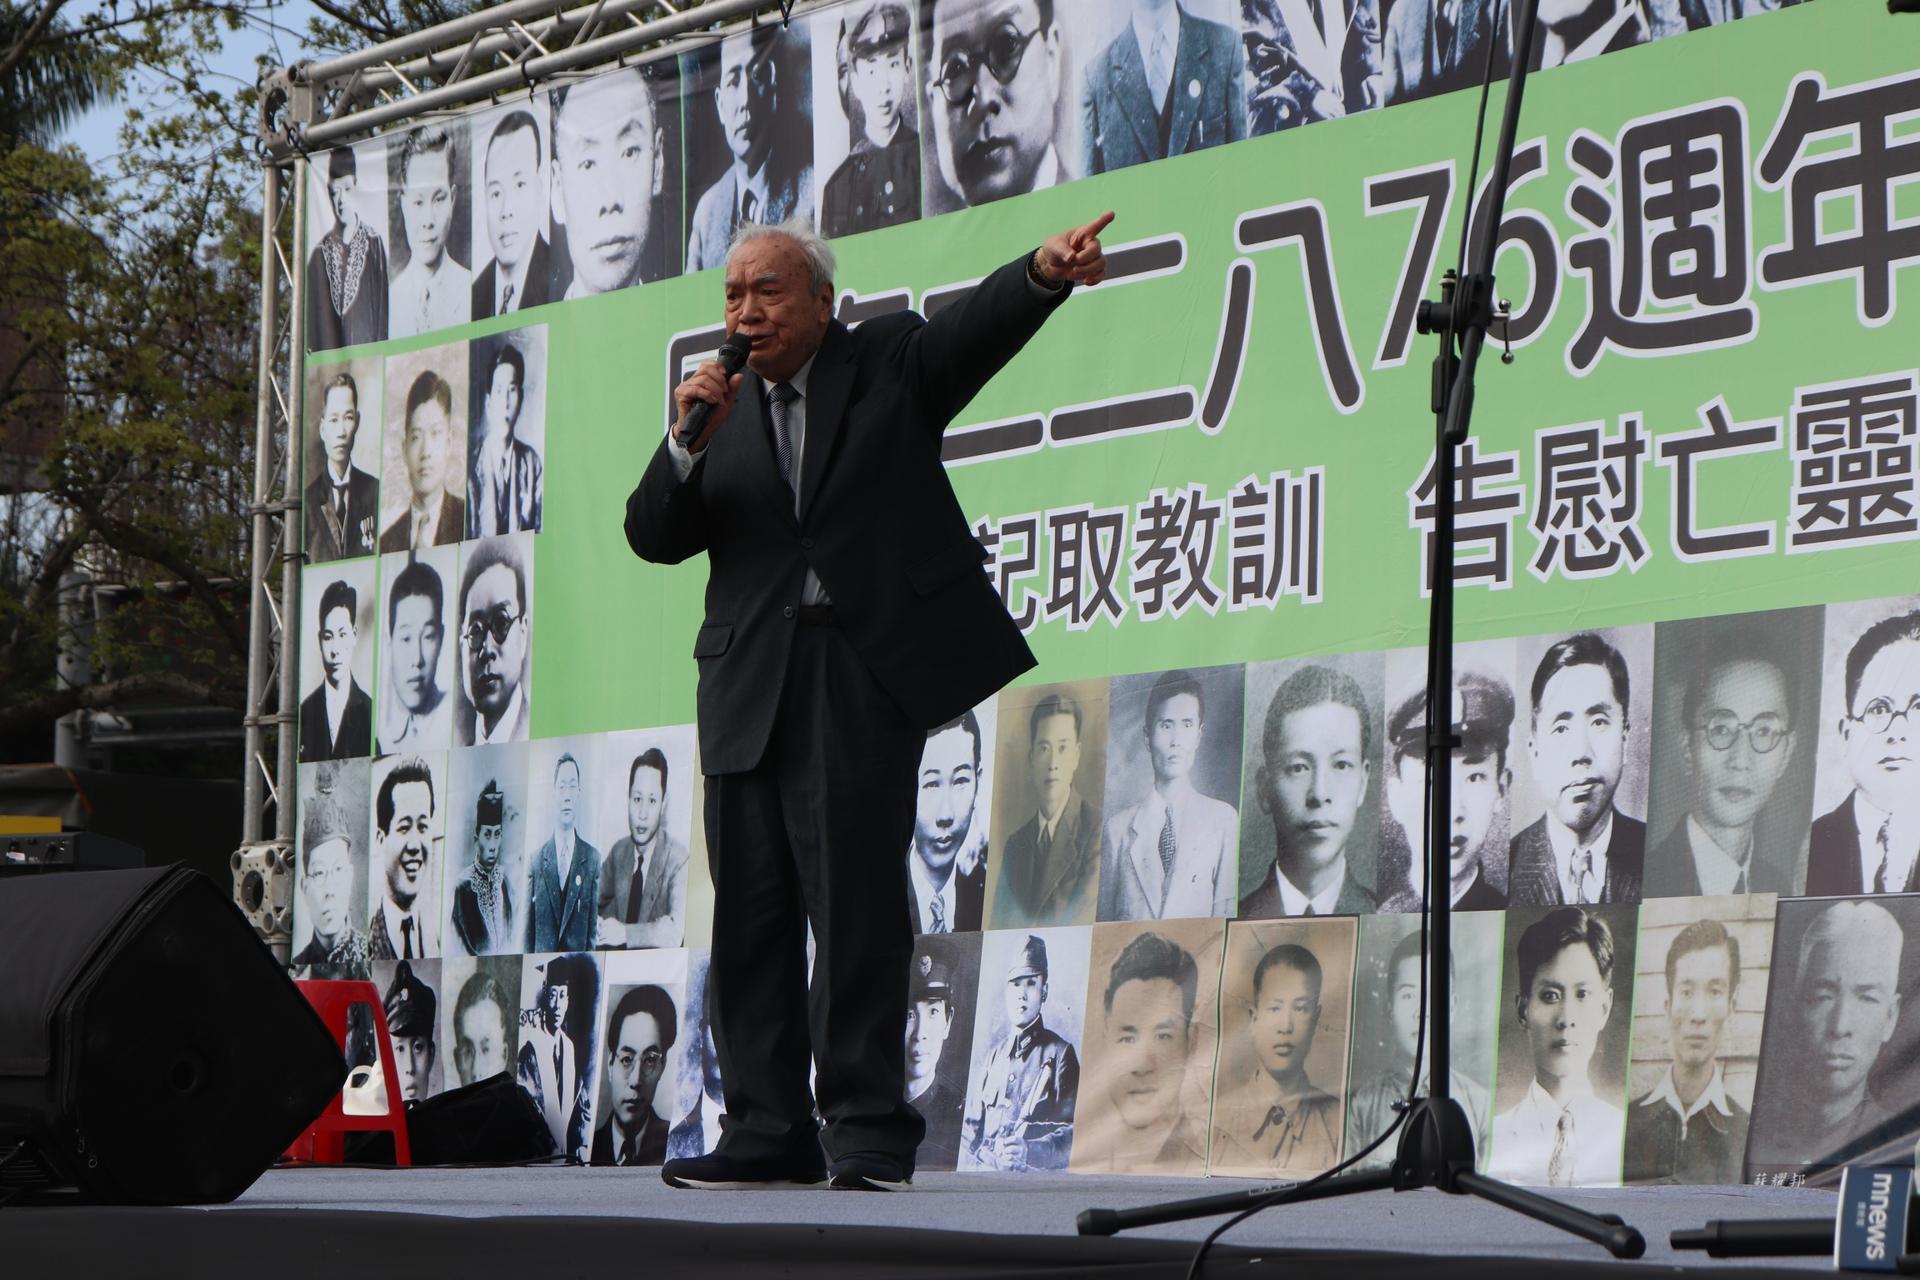 Memorial groups held an event in front of the Chiang Kai-Shek memorial hall to draw attention to 228 victims' families, and their demand that Chiang Kai-Shek's statue be removed. 